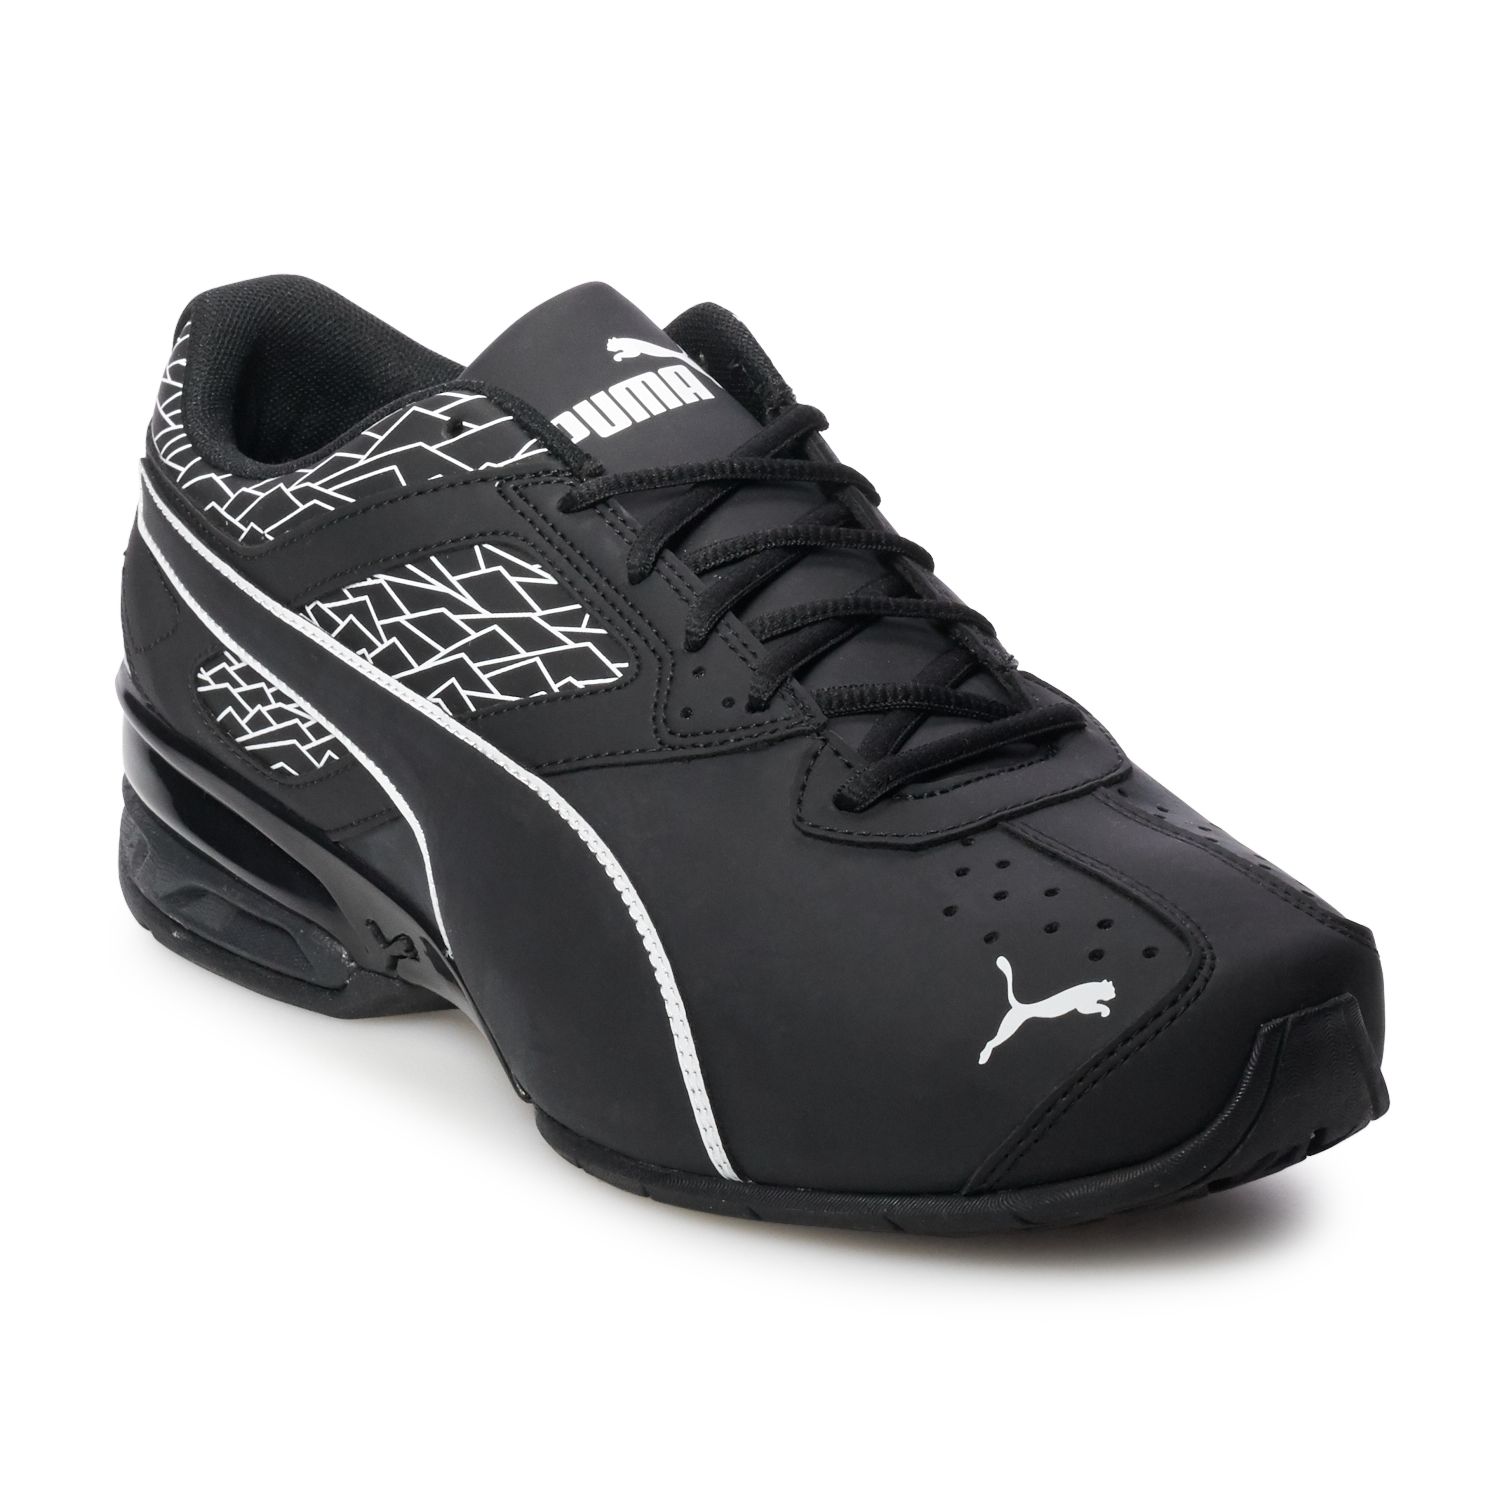 puma tazon 6 running shoes review